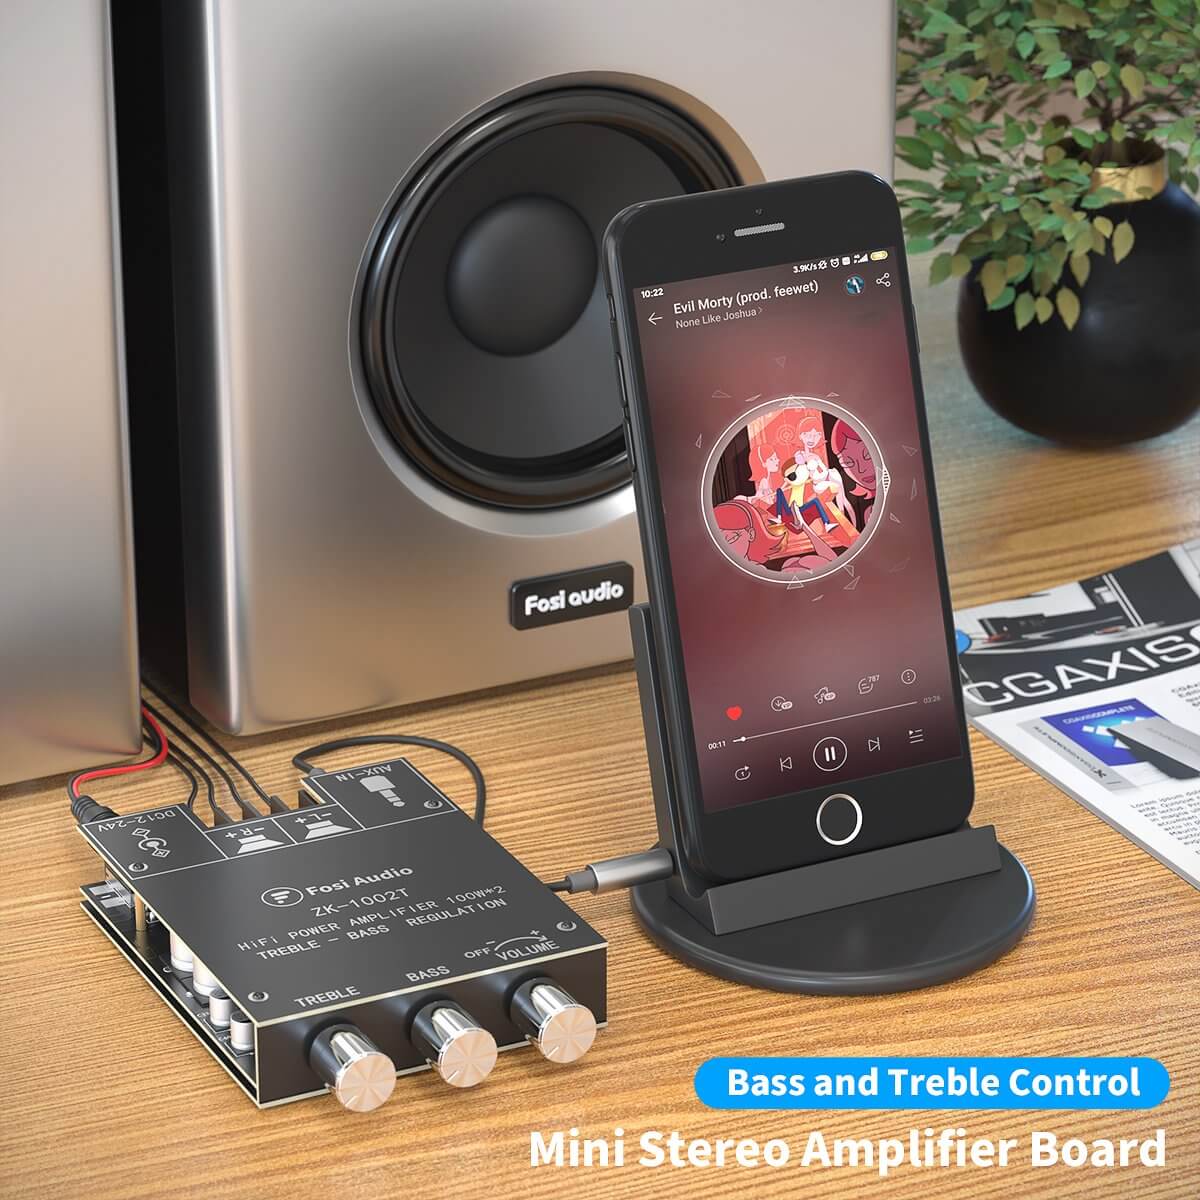  Bluetooth Treble and Bass Adjustment Subwoofer Amplifier Board